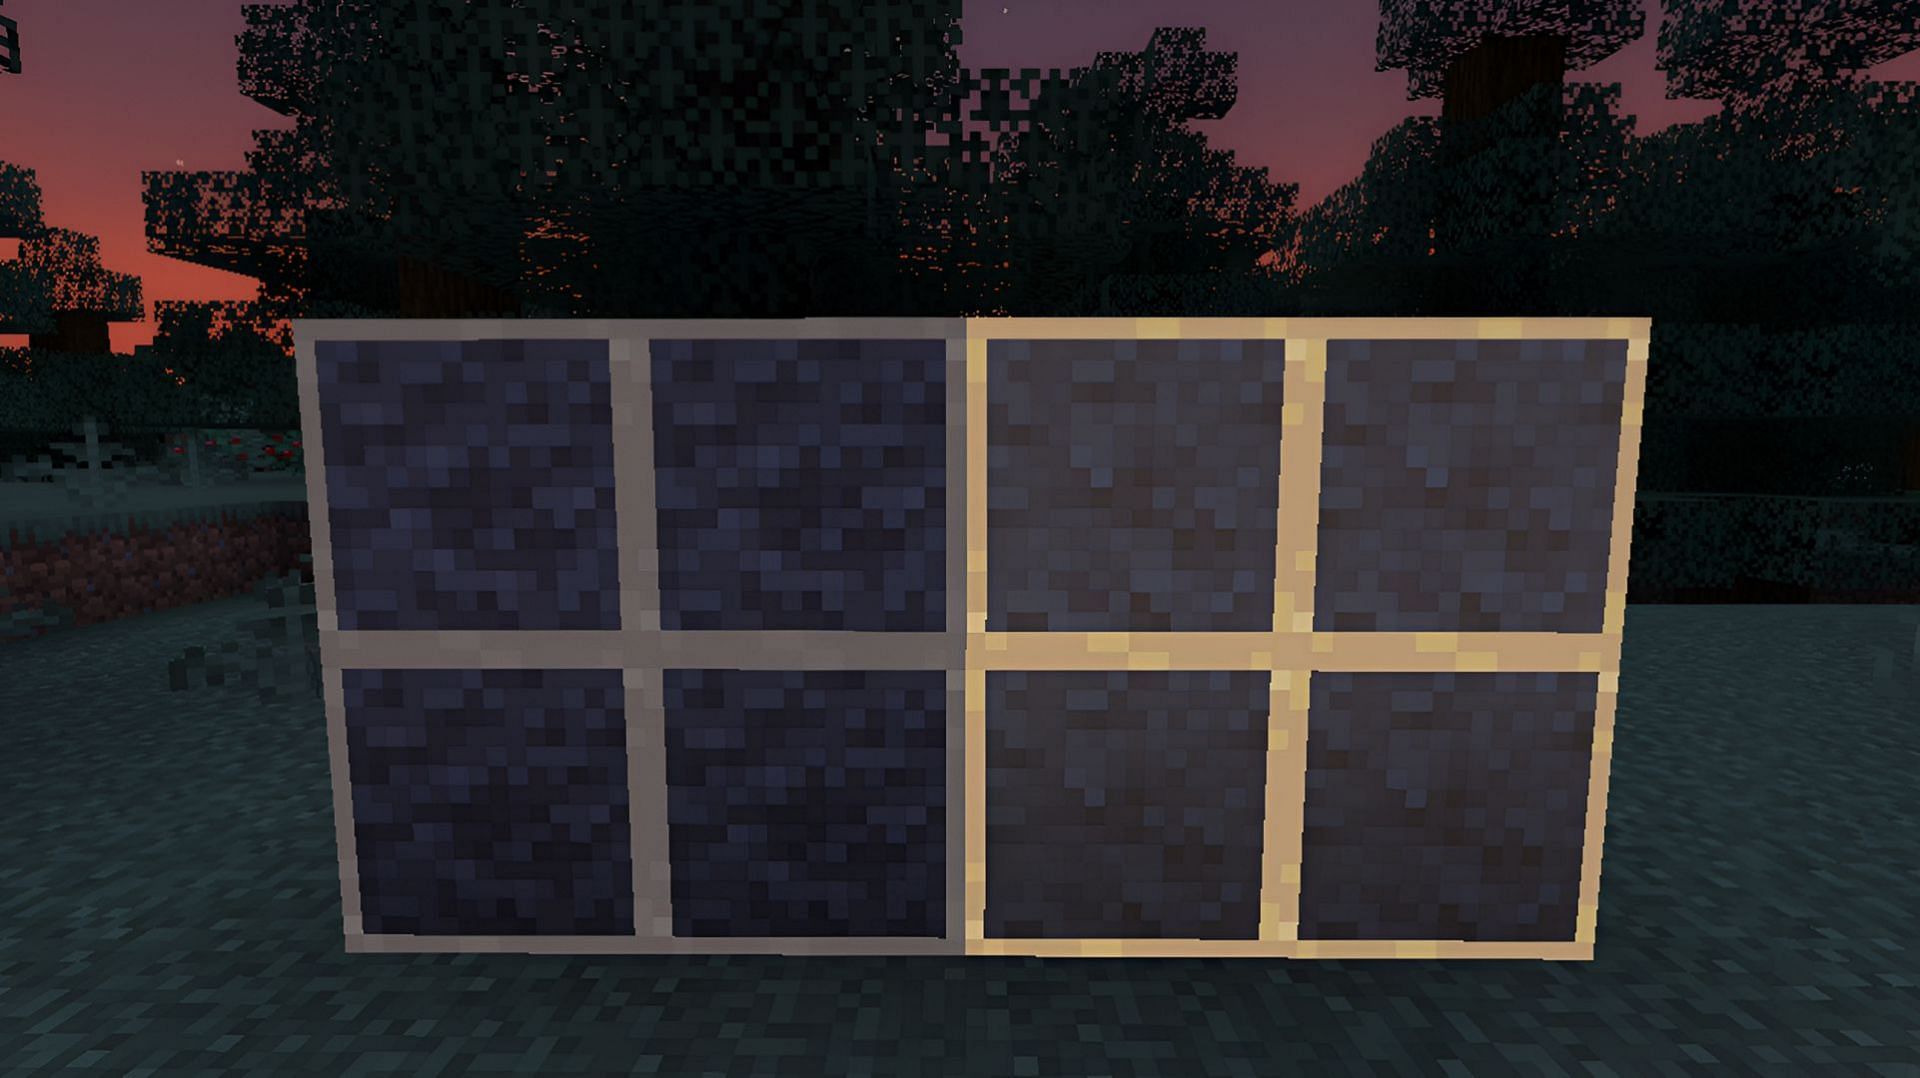 Easy Suspicious Block makes archeology much easier to perform in Minecraft (Image via Giq/Modrinth)